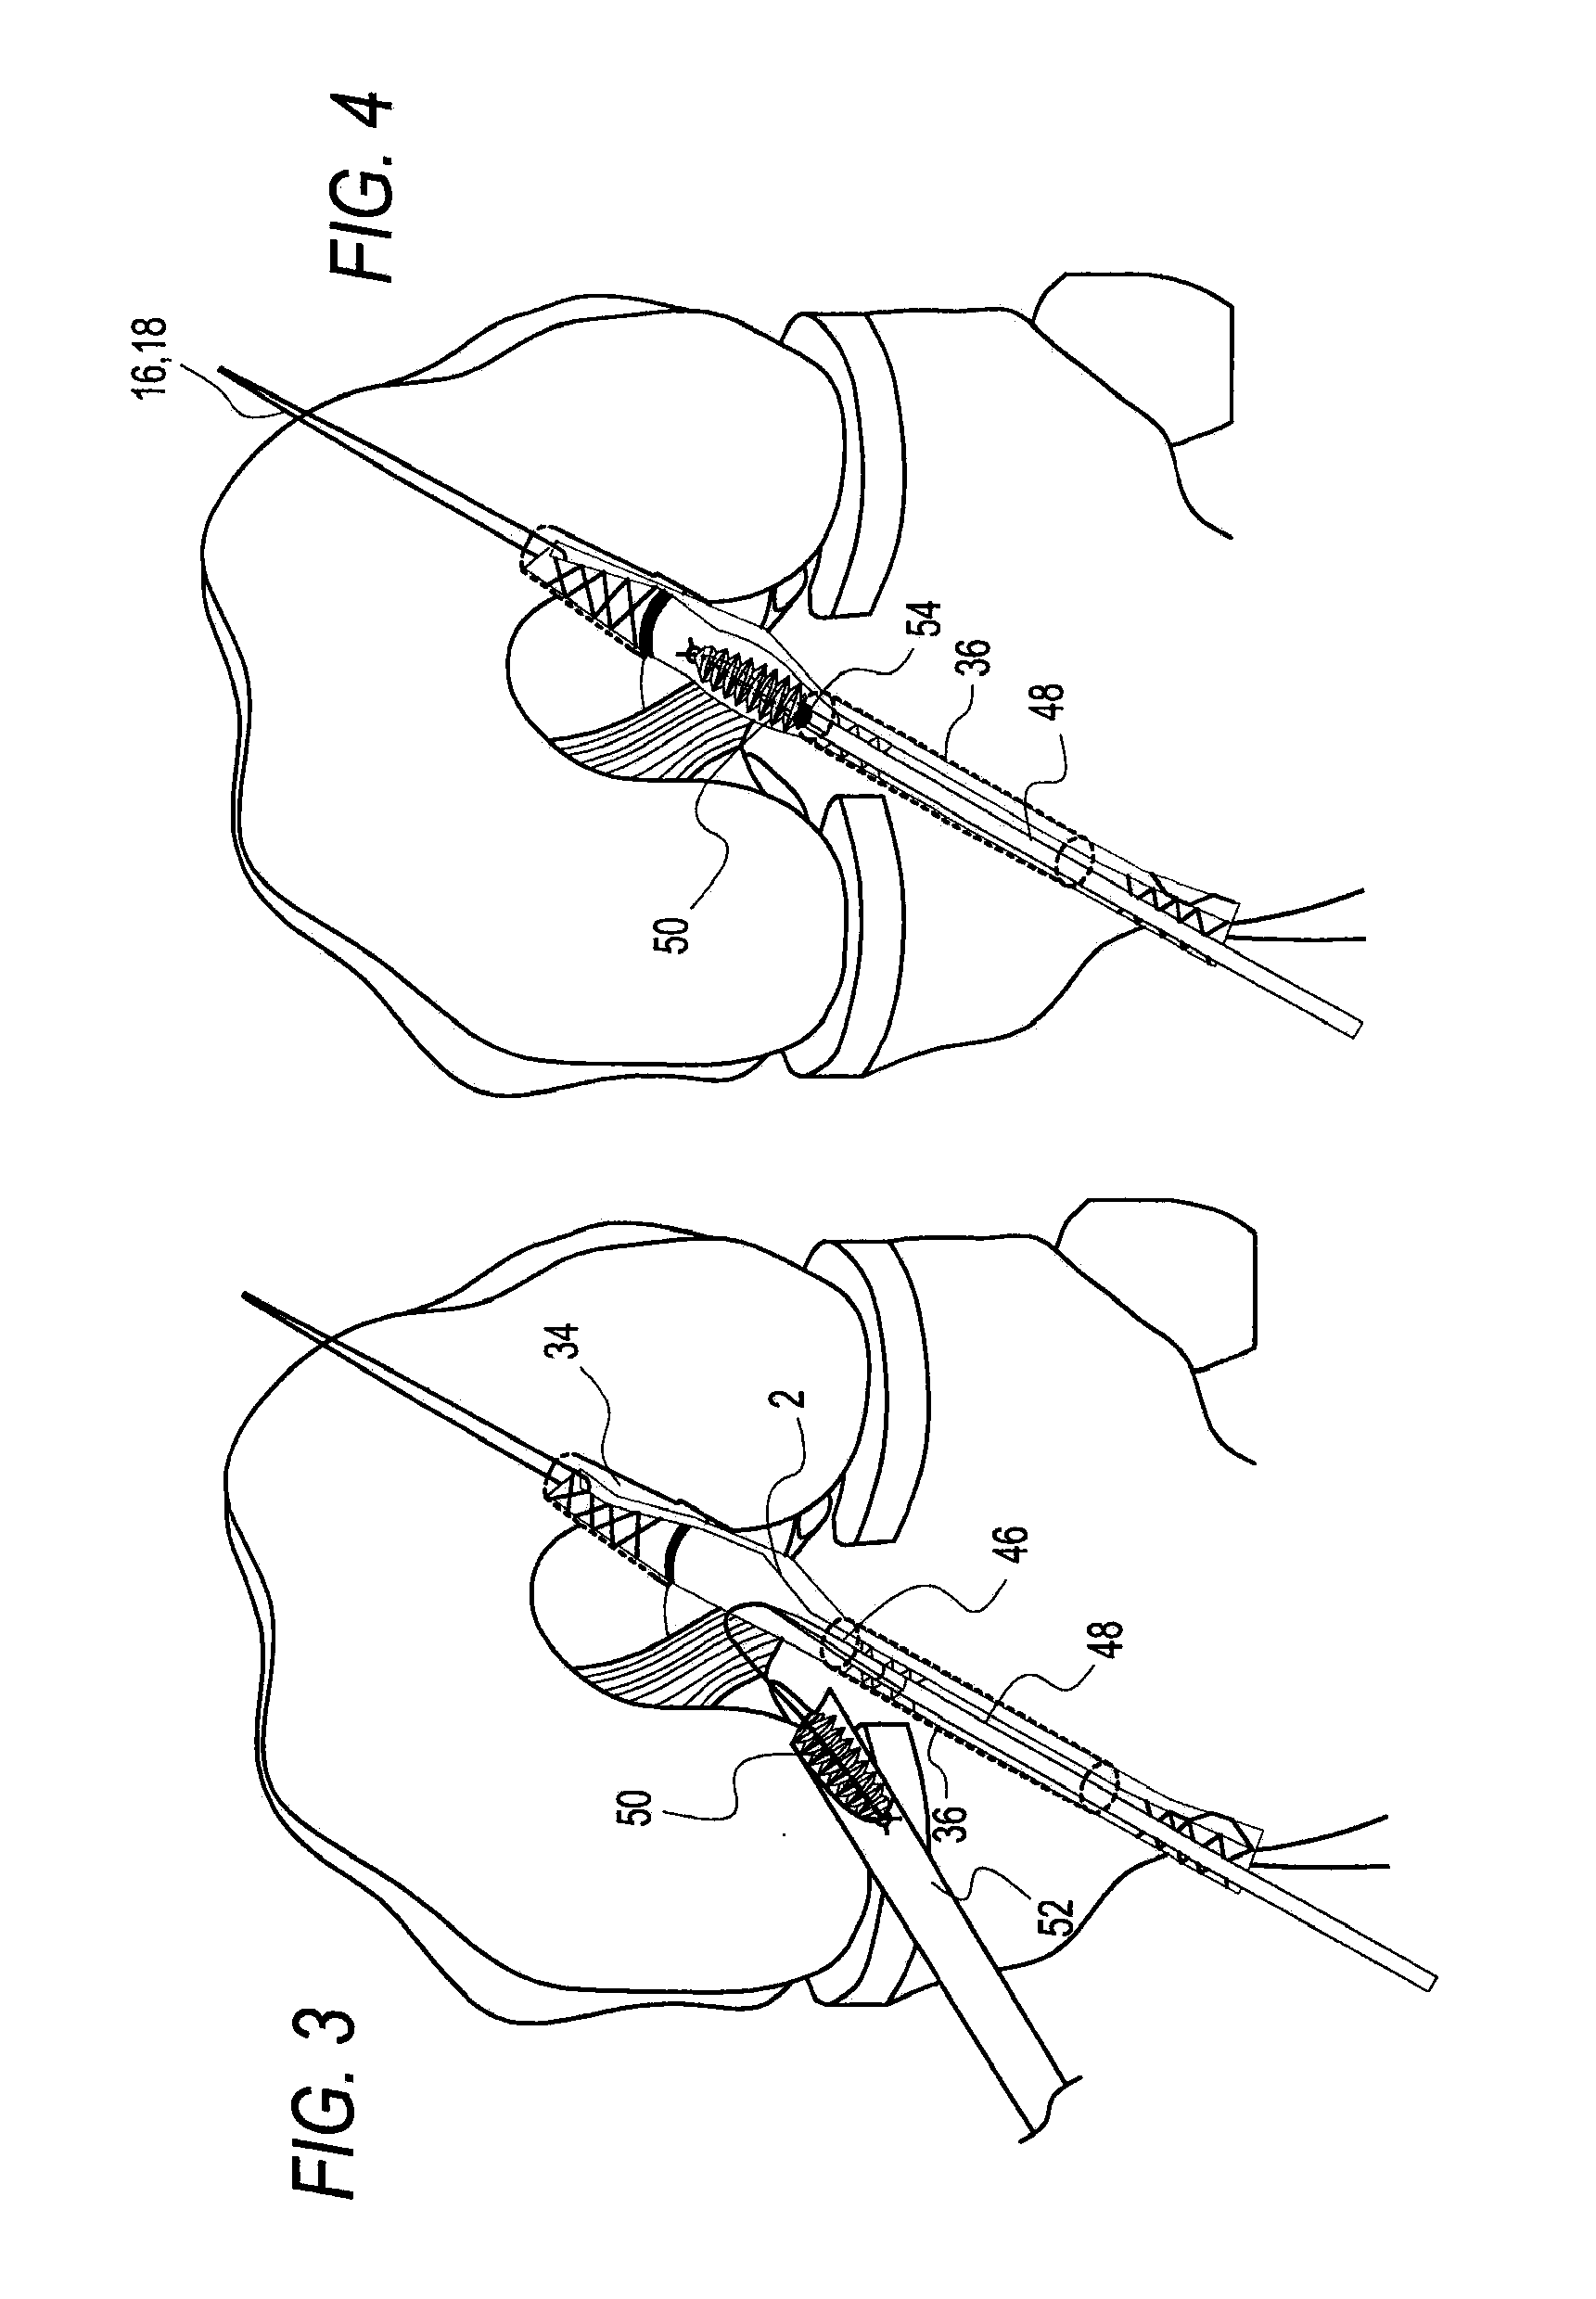 Method for creating a double bundle ligament orientation in a single bone tunnel during knee ligament reconstruction